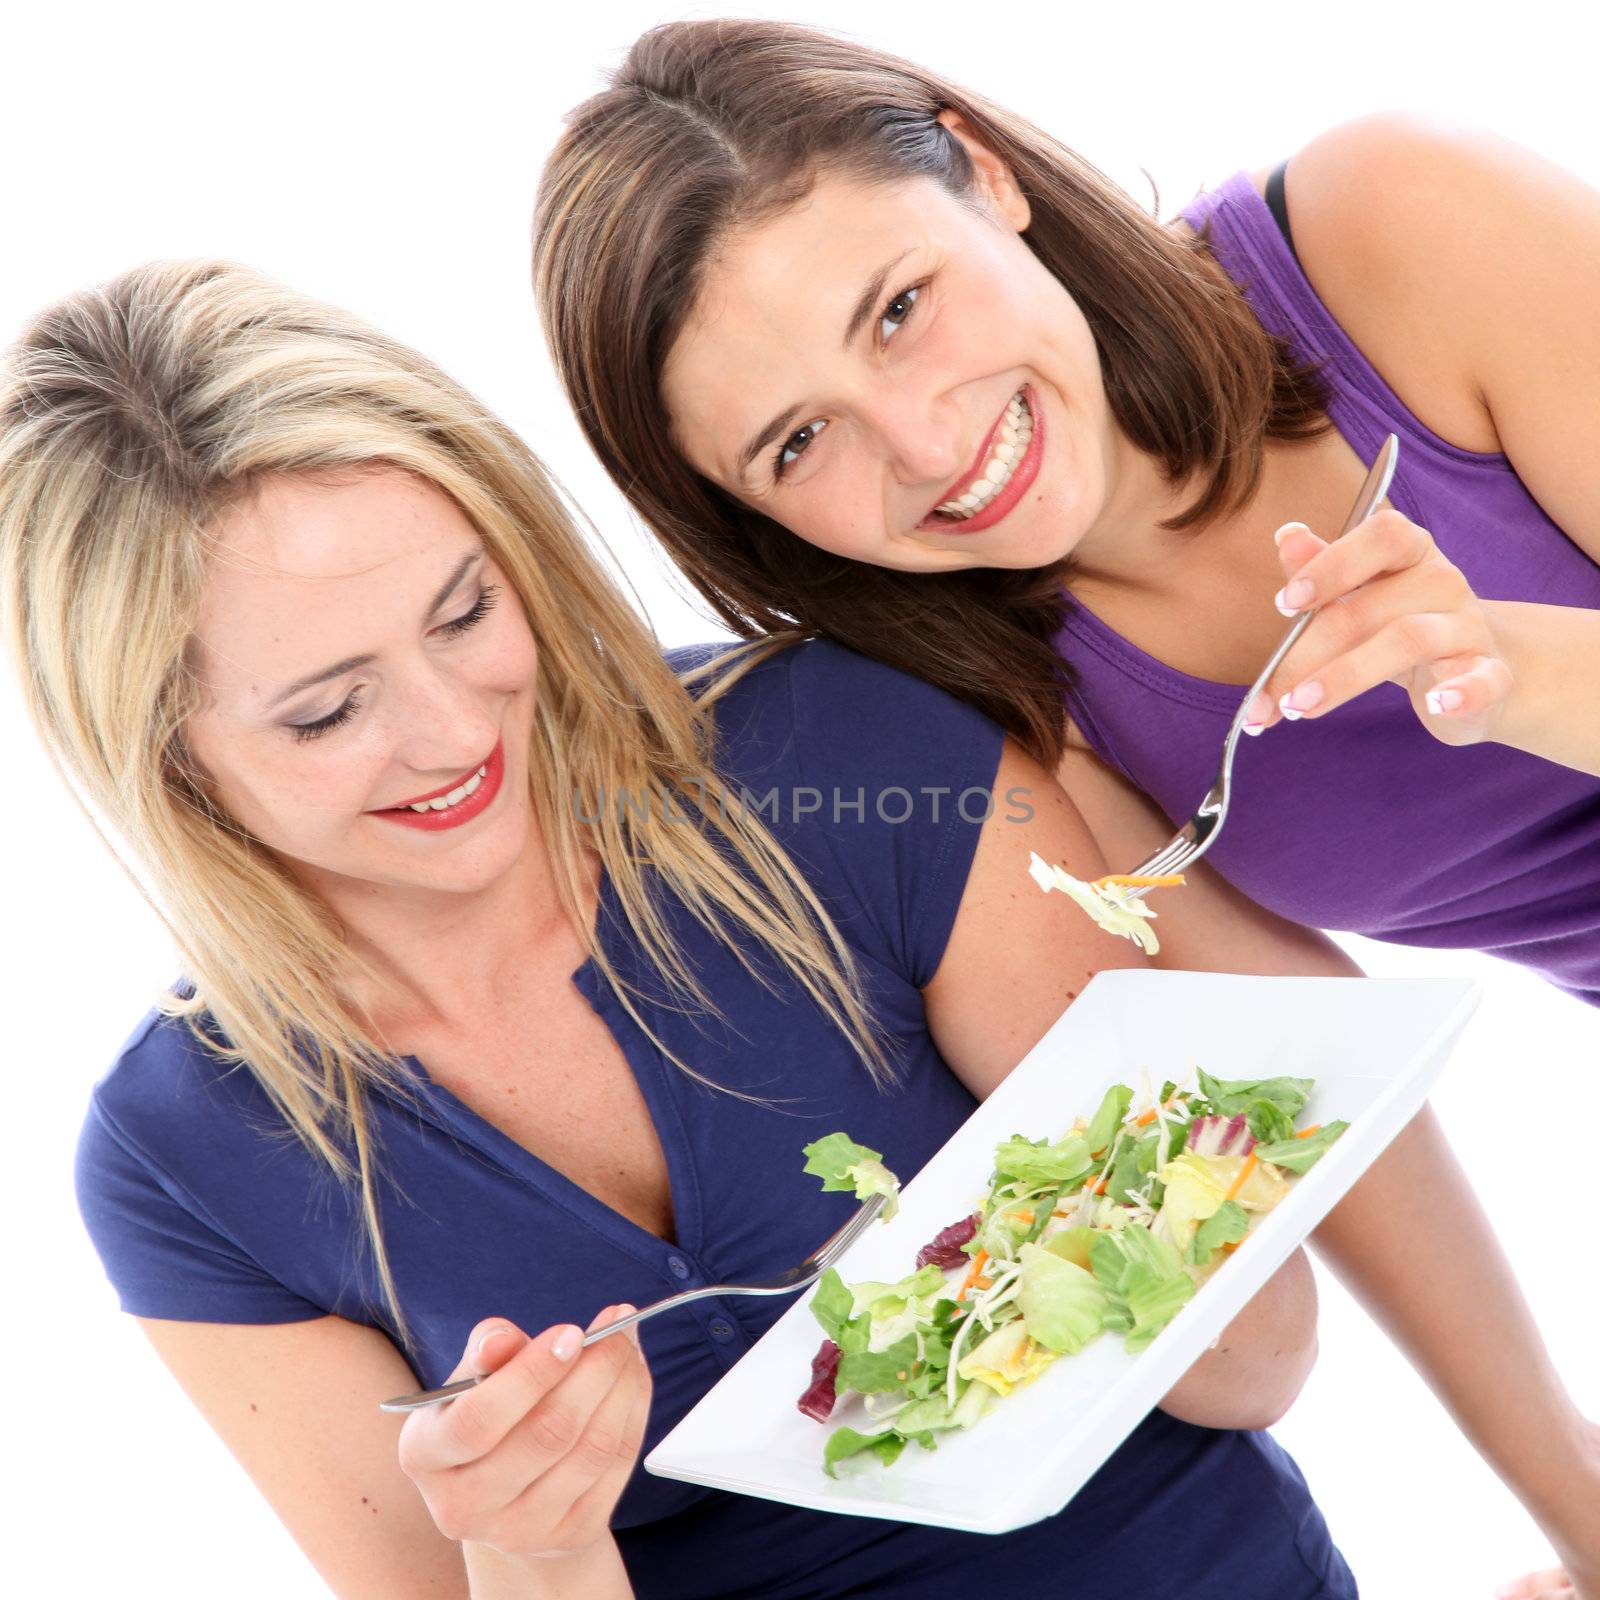 Two attractive female friends sharing a plate of healthy leafy green salad together isolated on white Two attractive female friends sharing a plate of healthy leafy green salad together isolated on whitesalad 